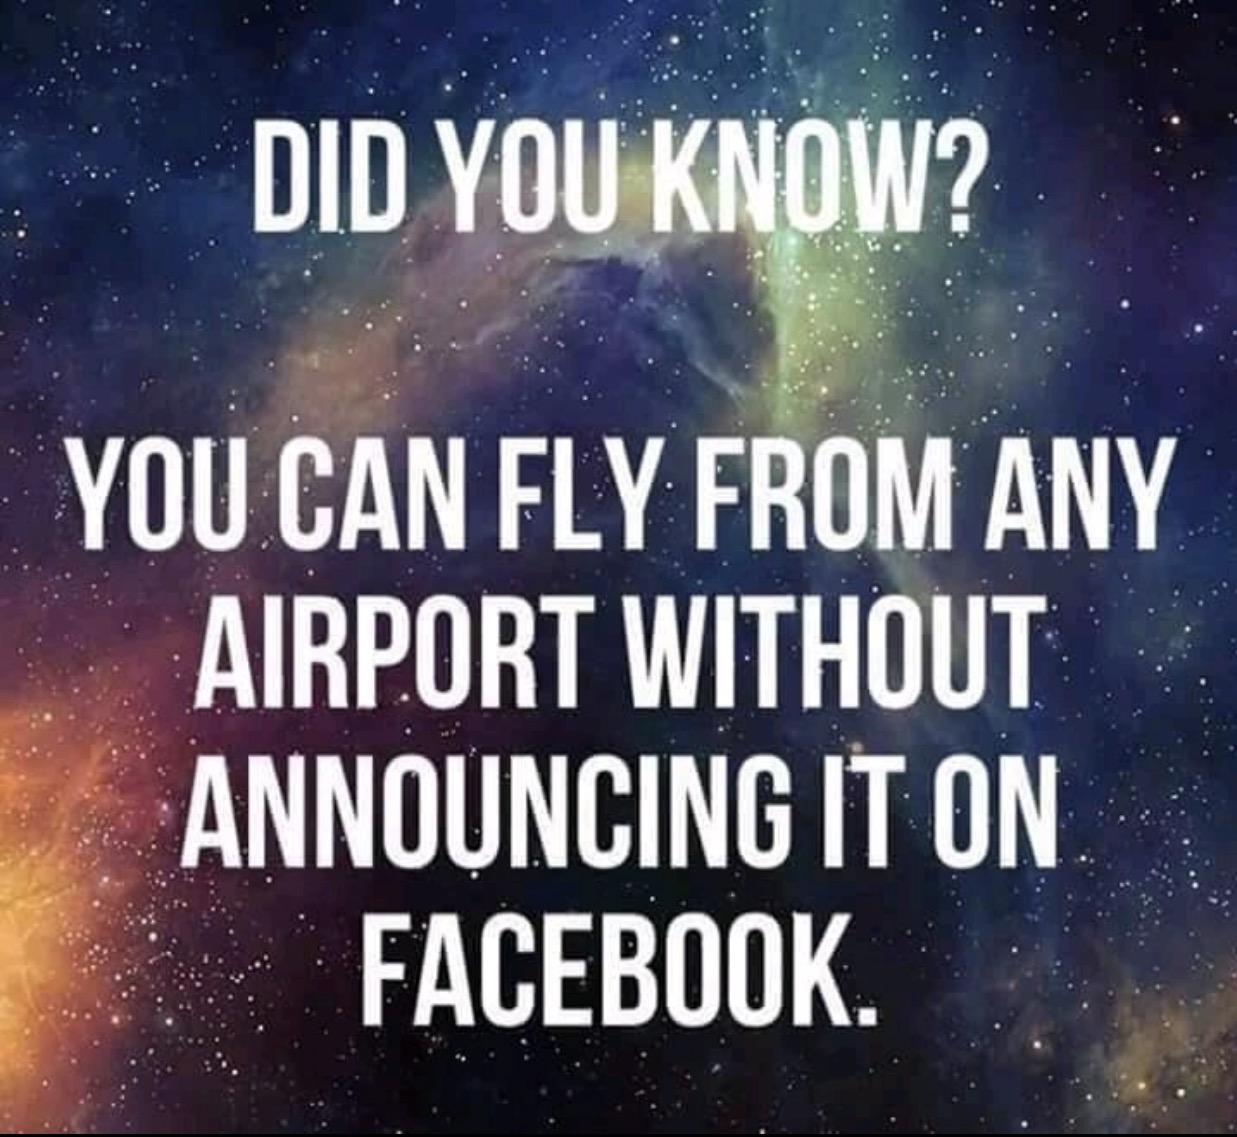 Little known fun fact that you can fly right out of an airport without ever mentioning it on Facebook